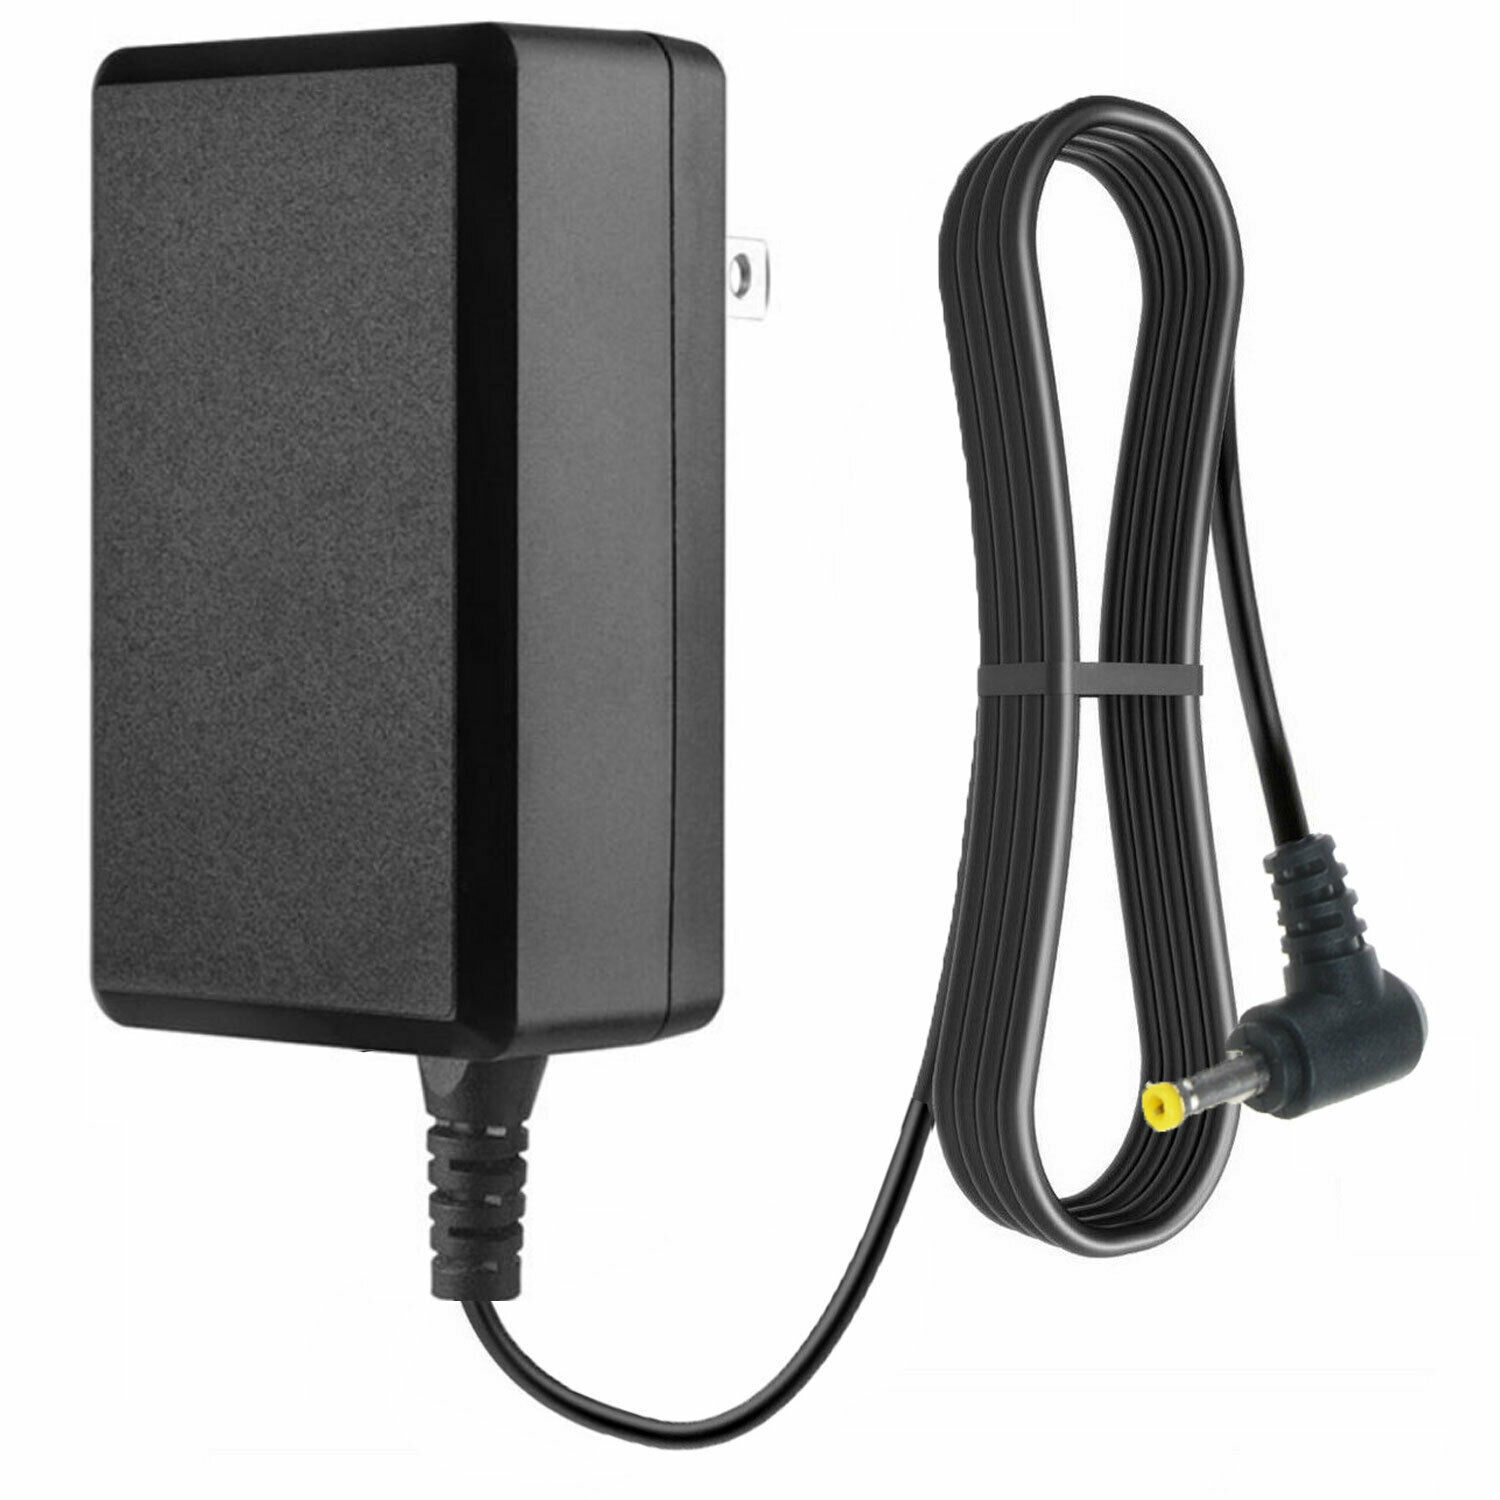 AC DC Adapter Charge rfor Tascam DR-2D DR-V1HD DR-100MKII DR100MKII Power Input Voltage: AC 100-240V, 50/60Hz Output: